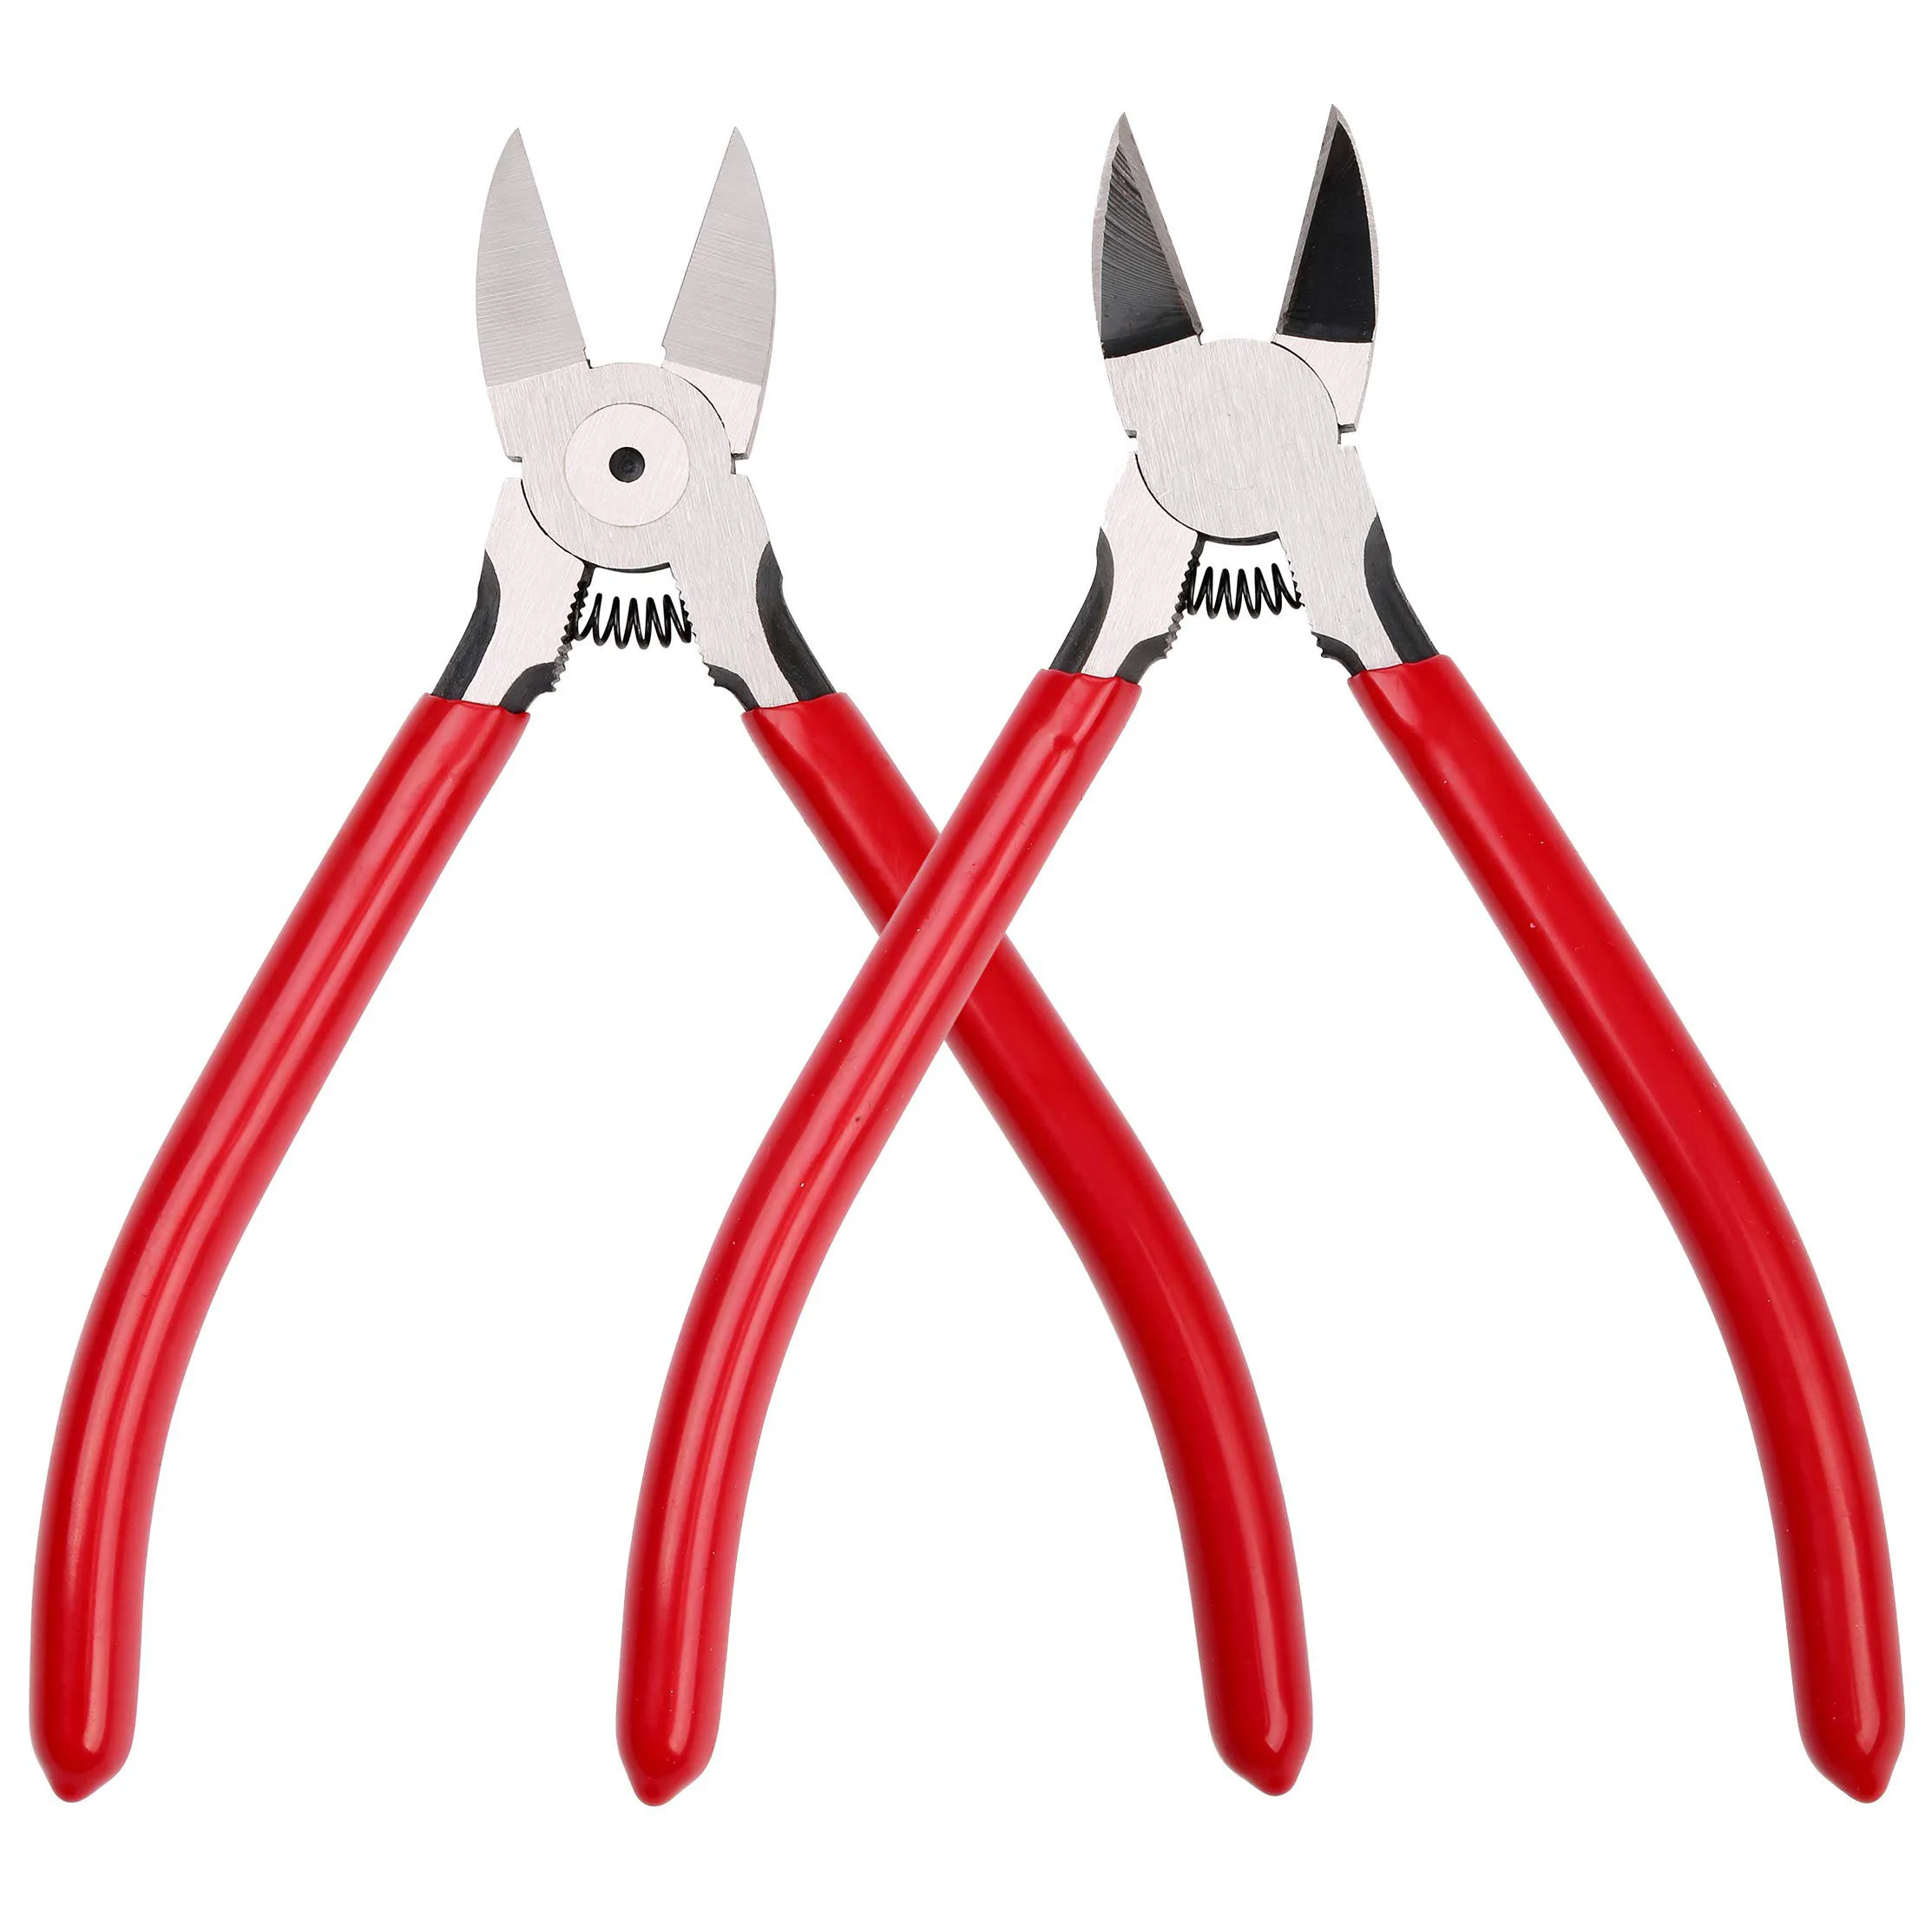 good price high quality in stock precision side cutter heavy duty flush cutting pliers tool diagonal cutting pliers